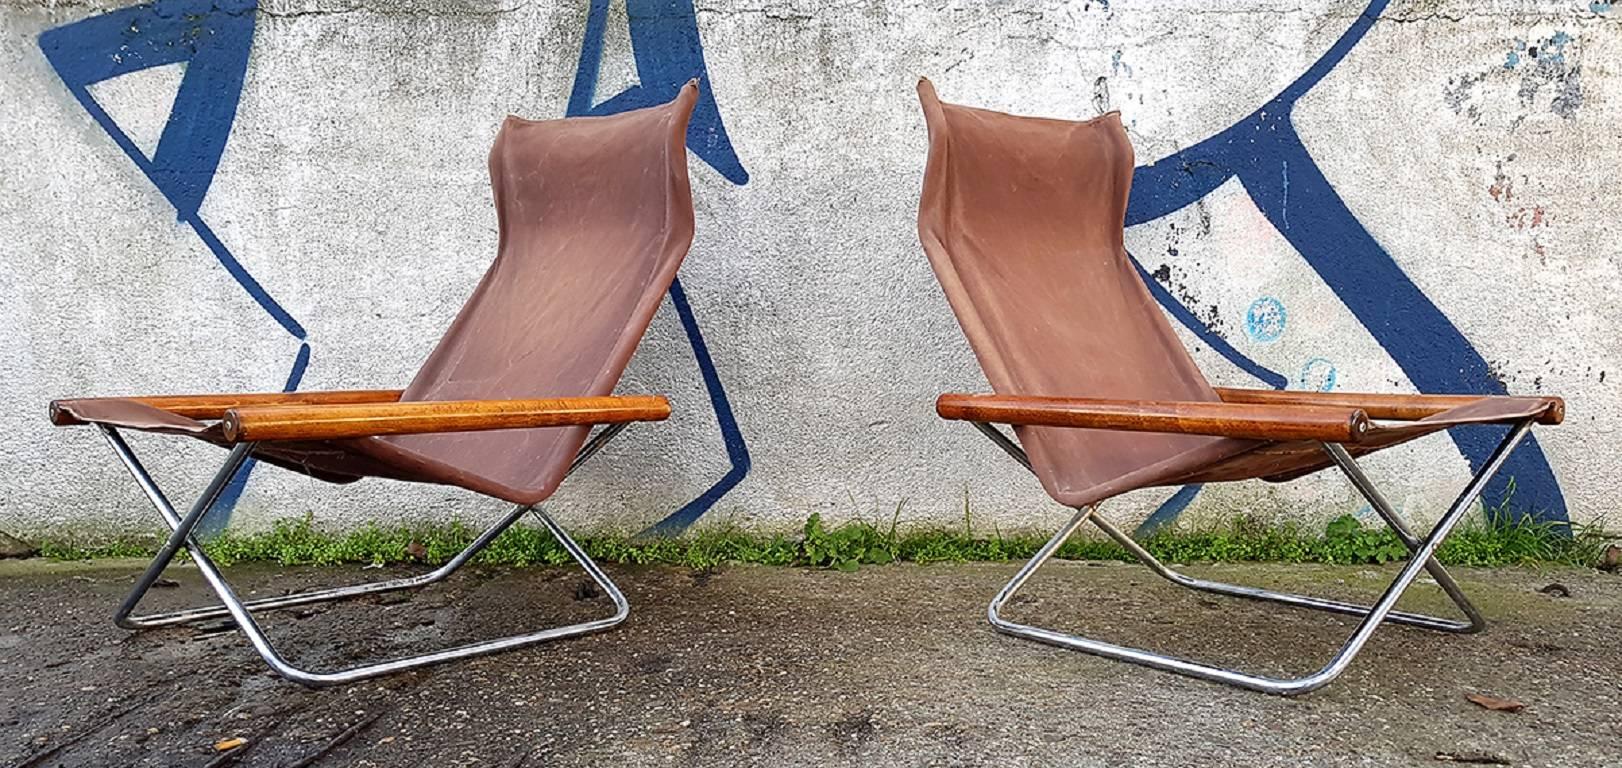 These foldable lounge chairs with canvas seats were designed by Japanese designer Takeshi Nii in 1958 and made by Jox Interni. 
The chair was named 'NY' after the designer's family name which meaning 'new' in Danish.
Canvas can be removed for